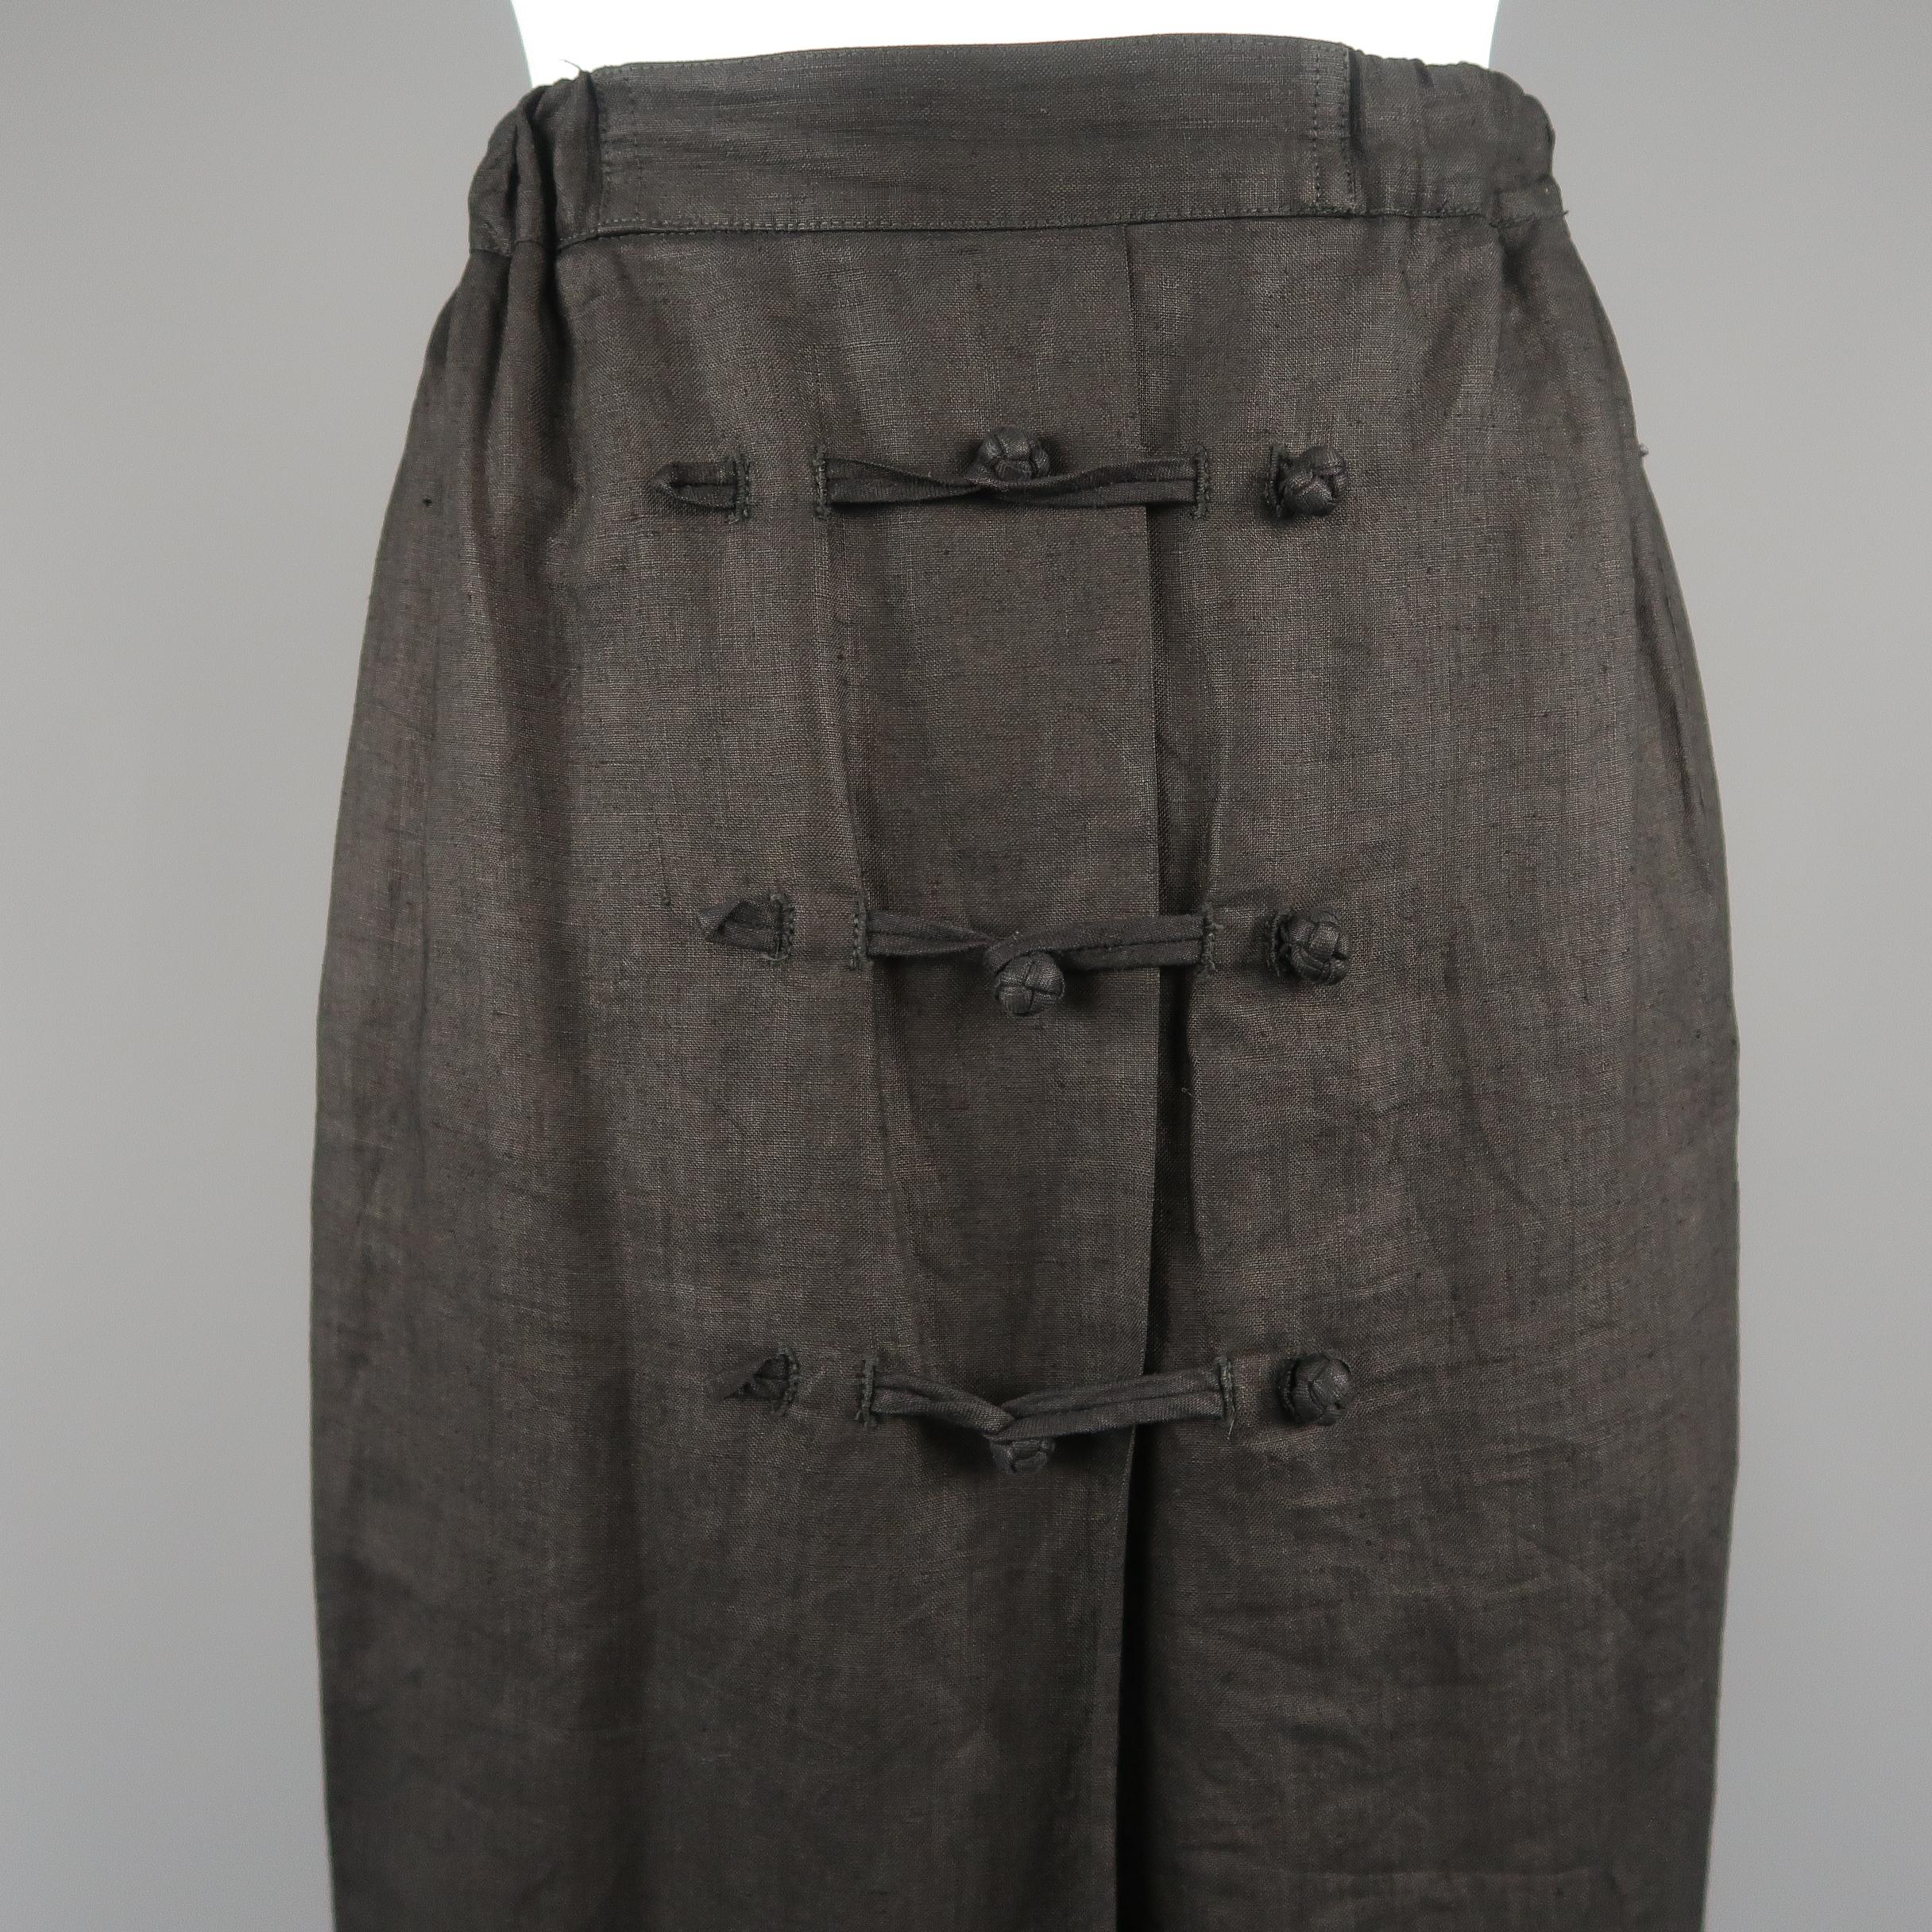 Vintage ISSEY MIYAKE A-line skirt comes in black linen with a faux wrap front, triple toggle closures, and elastic back waistband.
 
Good Pre-Owned Condition.
Marked: S
 
Measurements:
 
Waist: 23 in.
Hips: 38 in.
Length: 33 in.